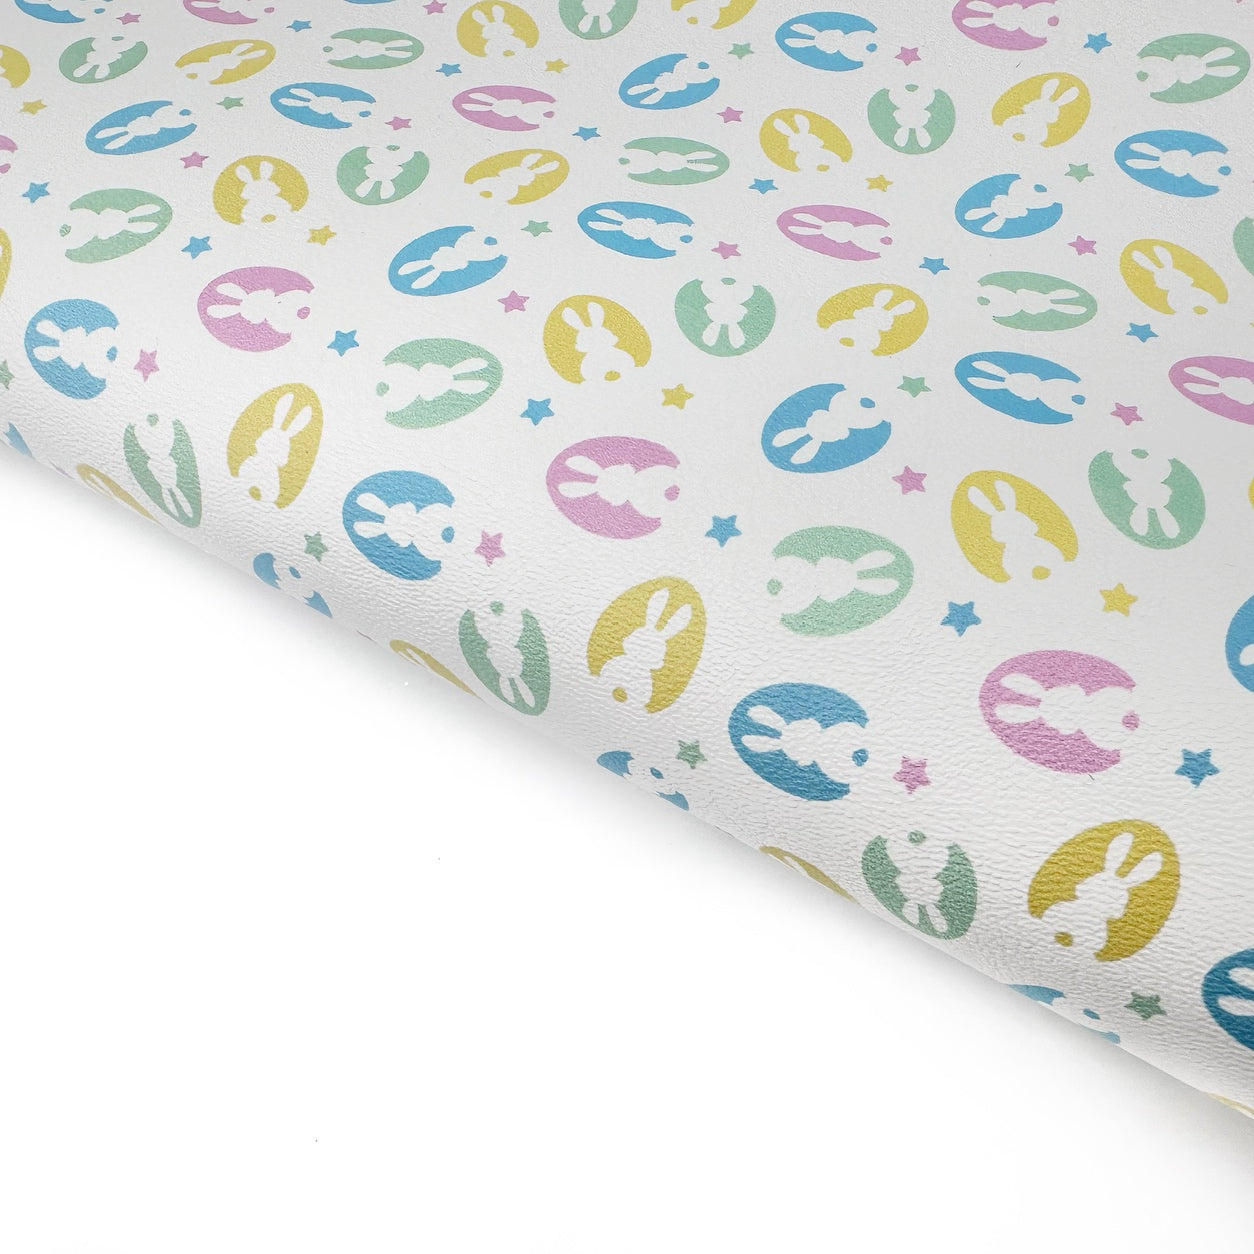 Easter Bunny's Eggs Premium Faux Leather Fabric Sheets